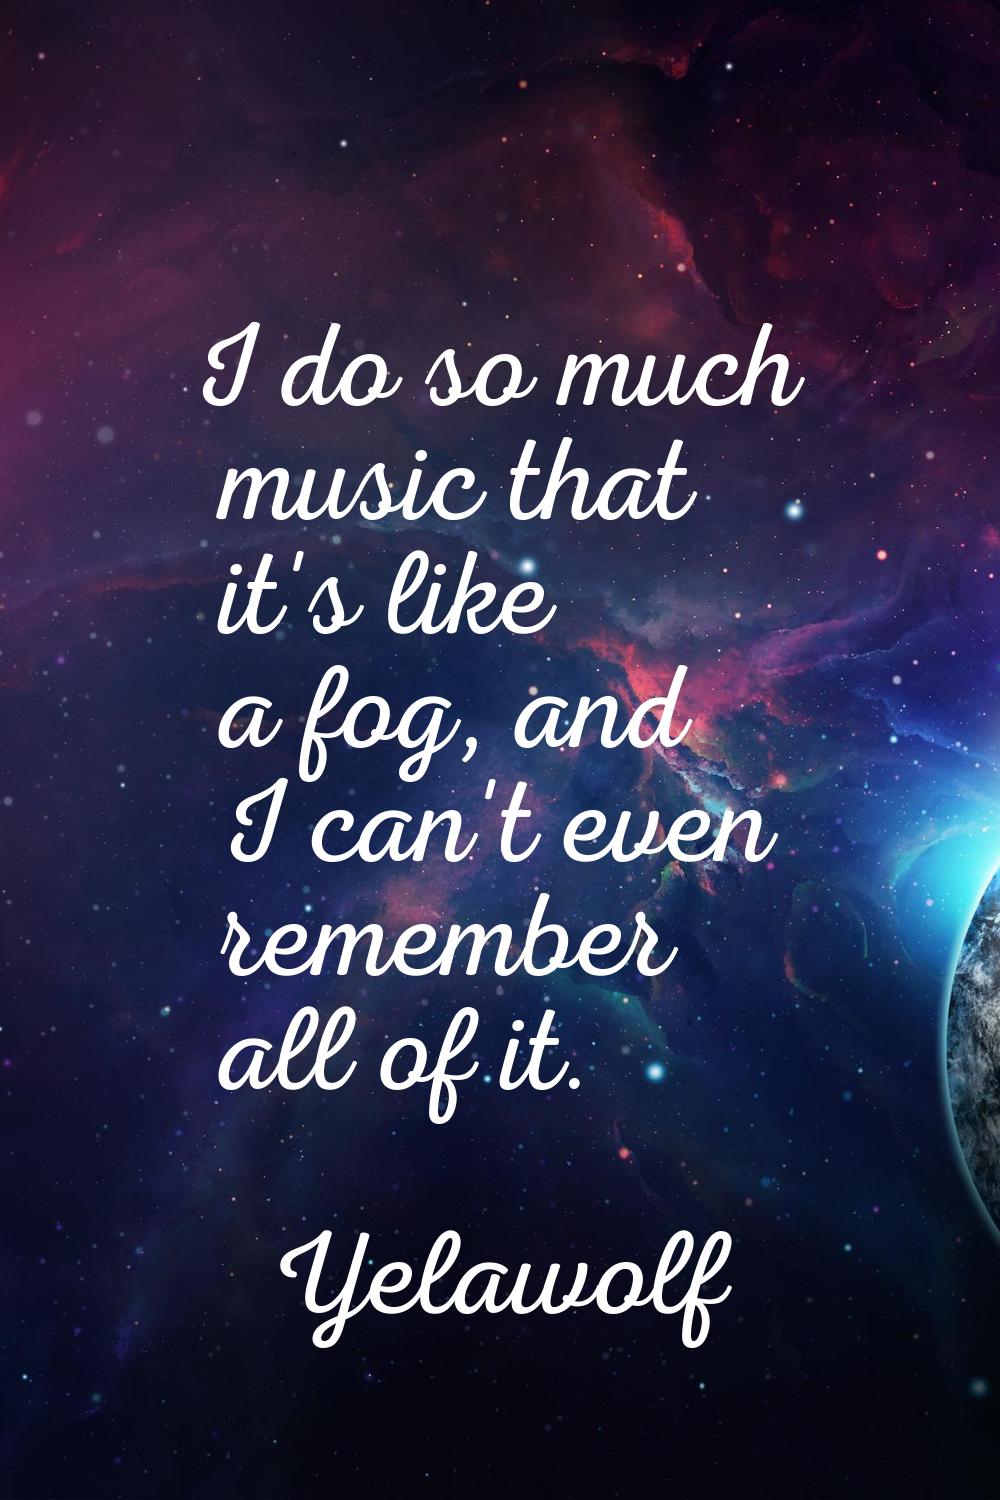 I do so much music that it's like a fog, and I can't even remember all of it.